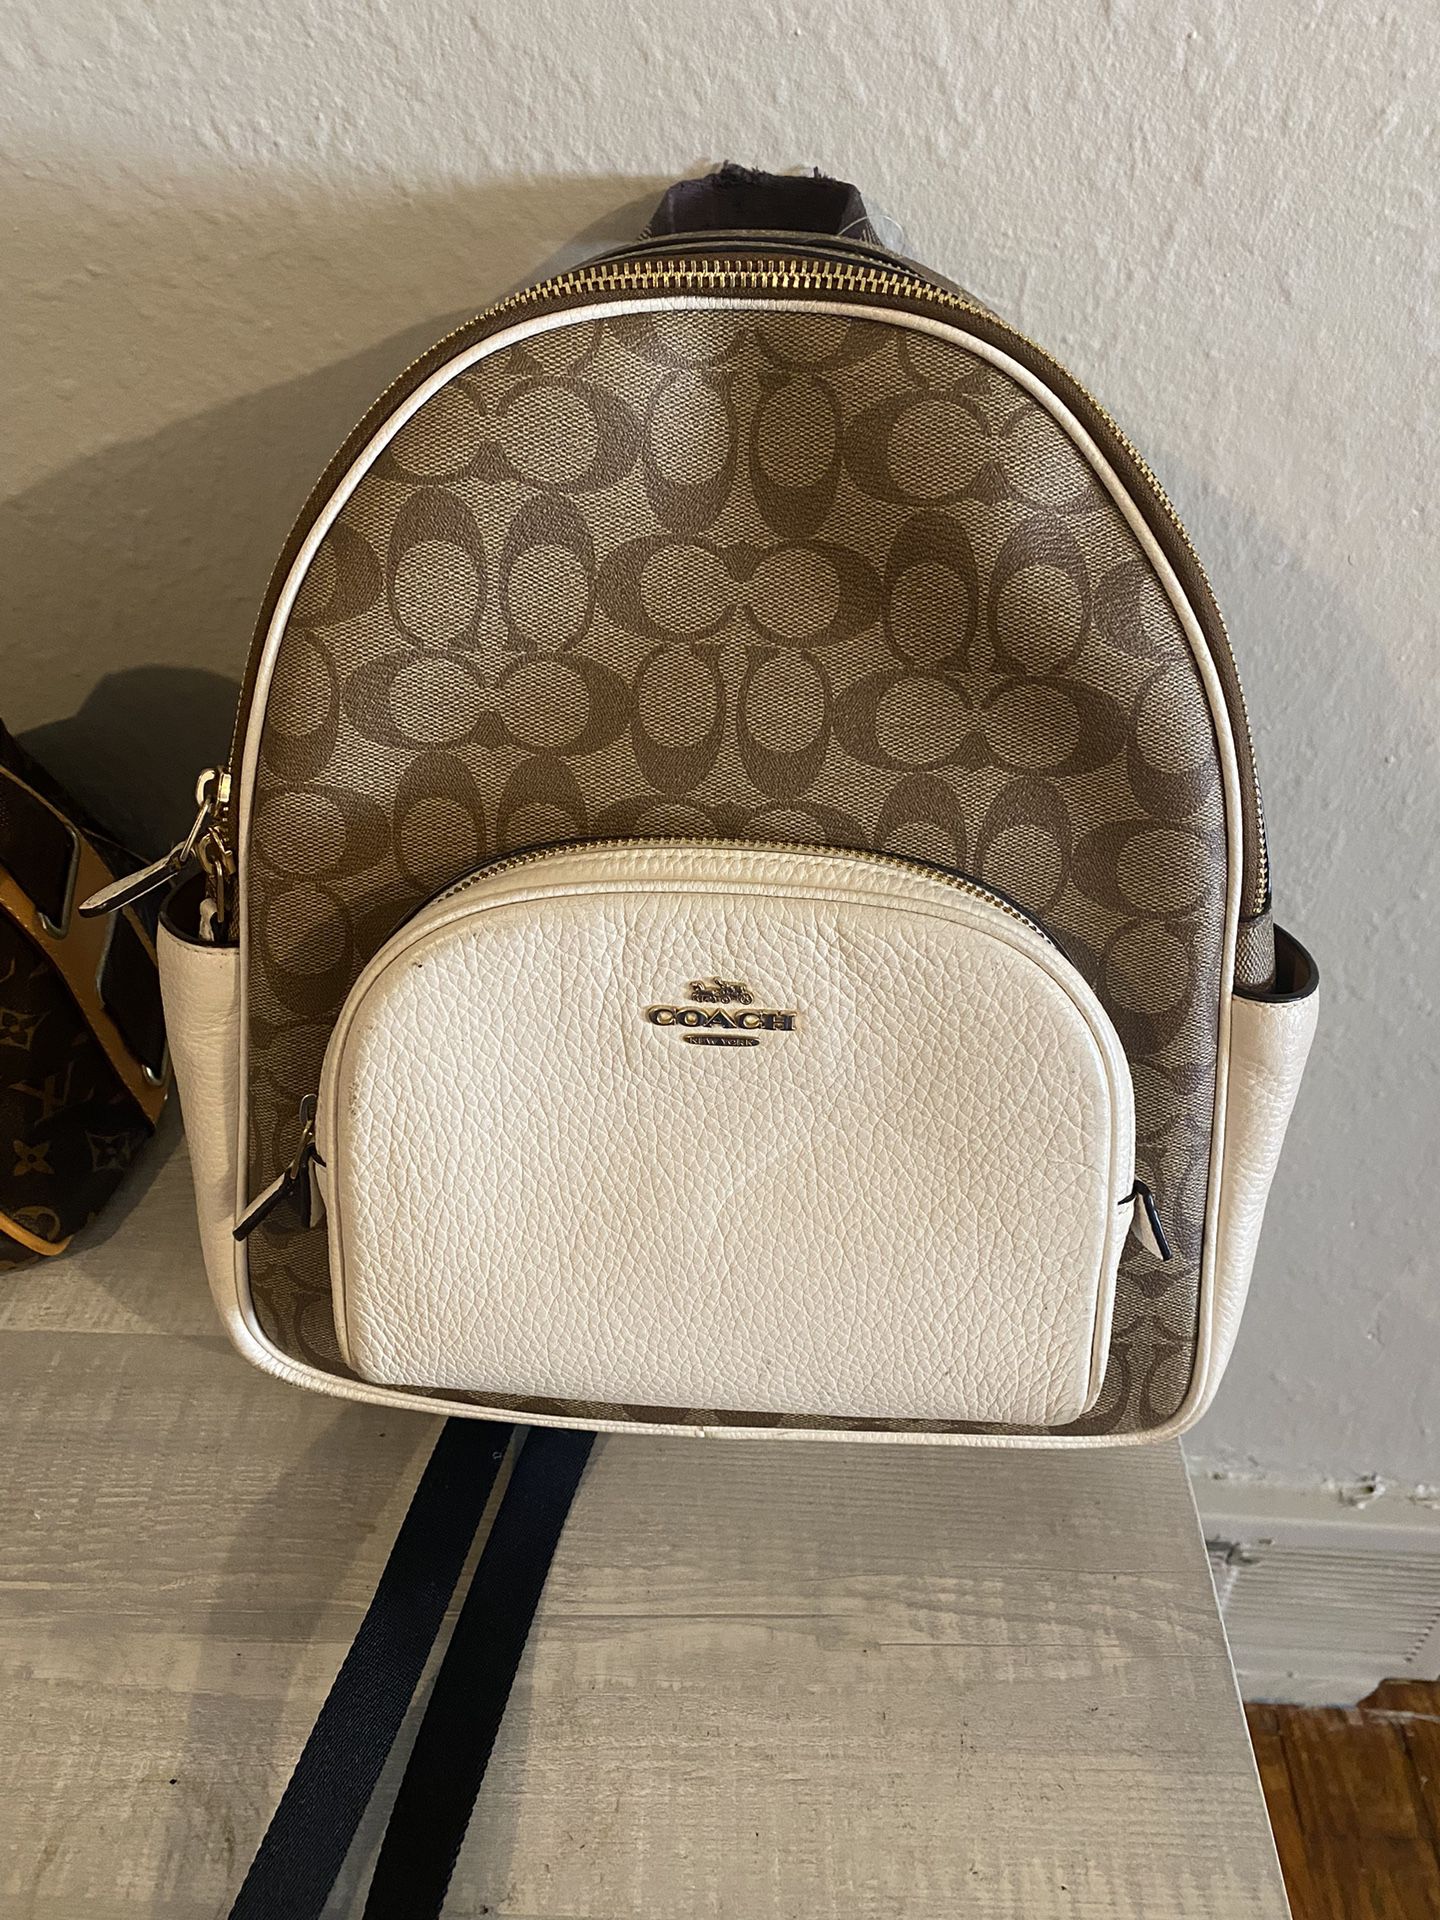 Coach Book-Bag for Sale in Cleveland, OH - OfferUp